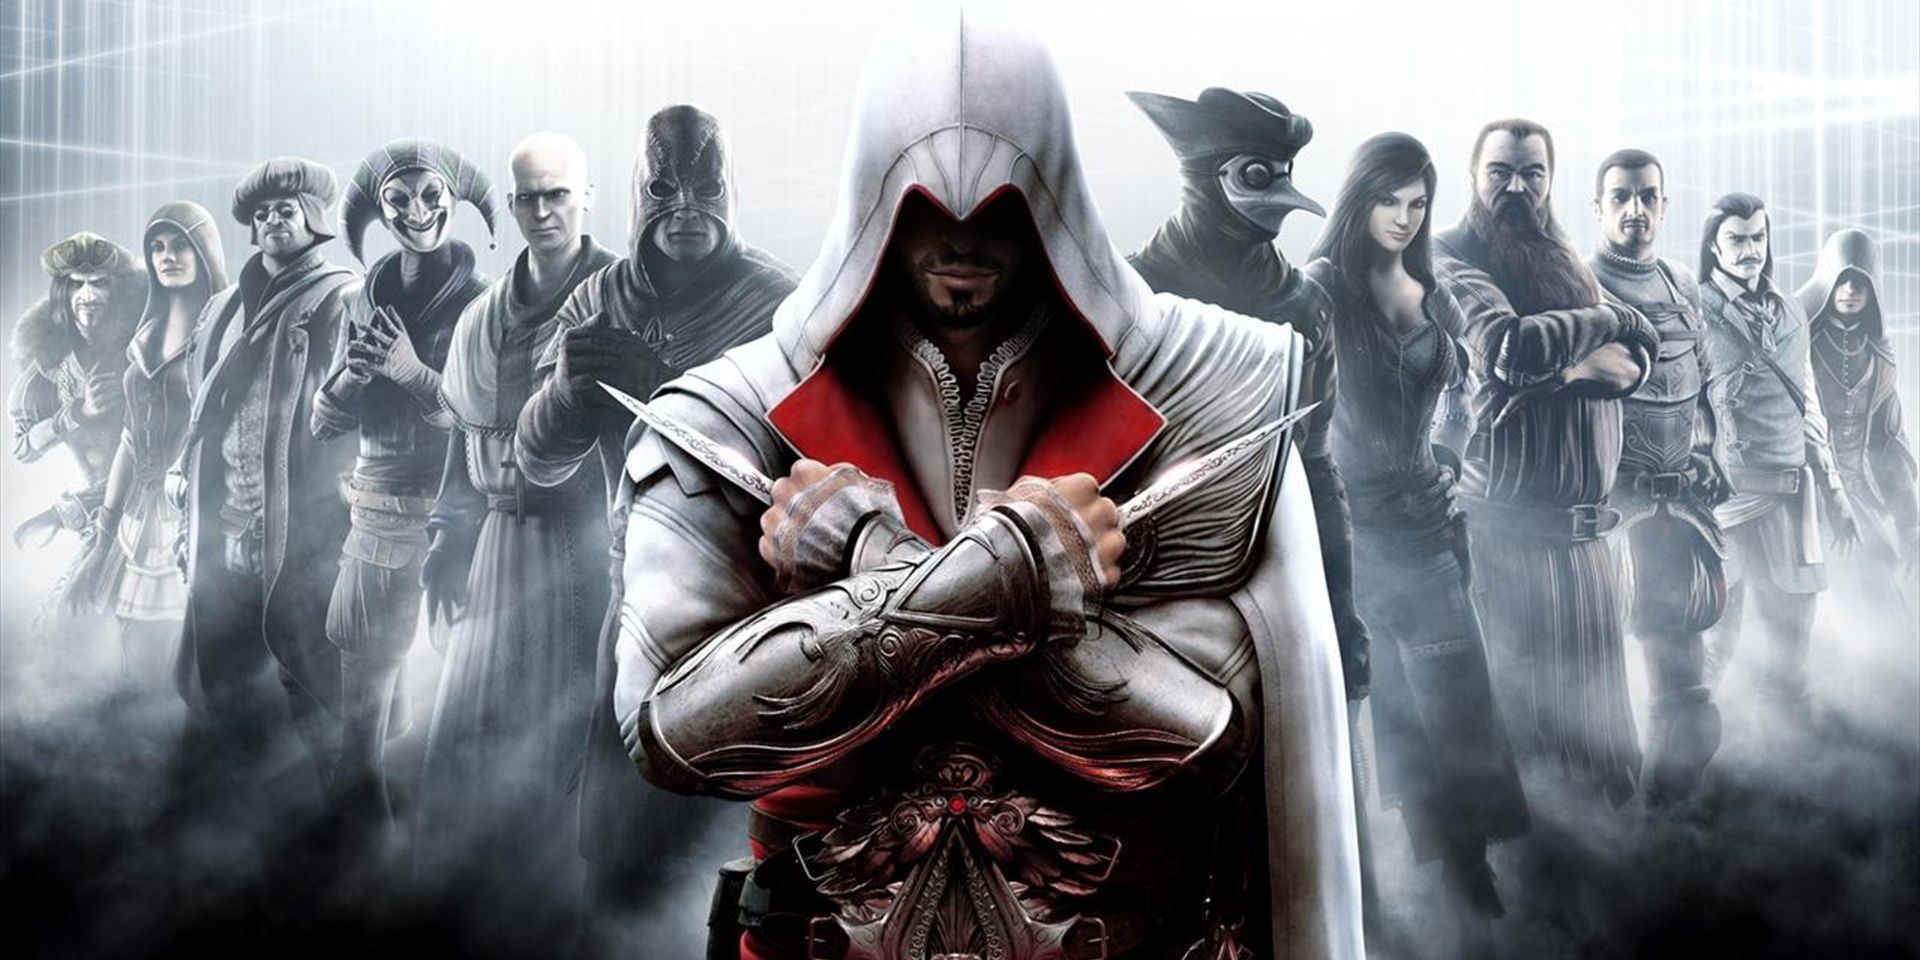 Assassins Creed 5 Games That Could Be Turned Into Films (And 5 That Shouldnt)